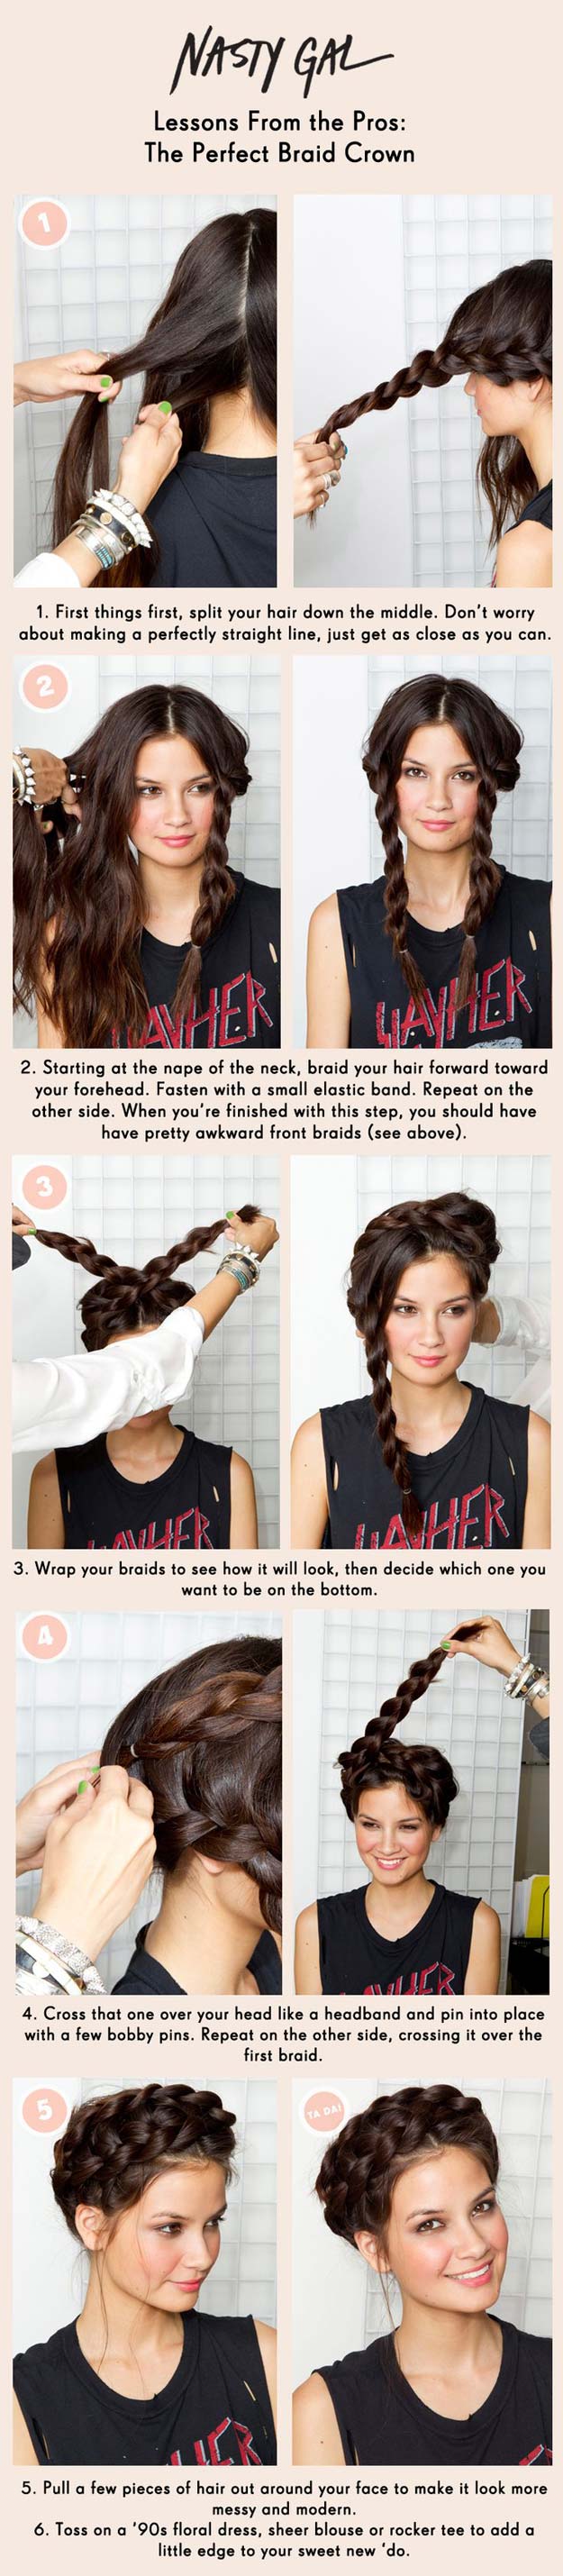 Cool and Easy DIY Hairstyles - Braid Crown - Quick and Easy Ideas for Back to School Styles for Medium, Short and Long Hair - Fun Tips and Best Step by Step Tutorials for Teens, Prom, Weddings, Special Occasions and Work. Up dos, Braids, Top Knots and Buns, Super Summer Looks http://diyprojectsforteens.com/diy-cool-easy-hairstyles